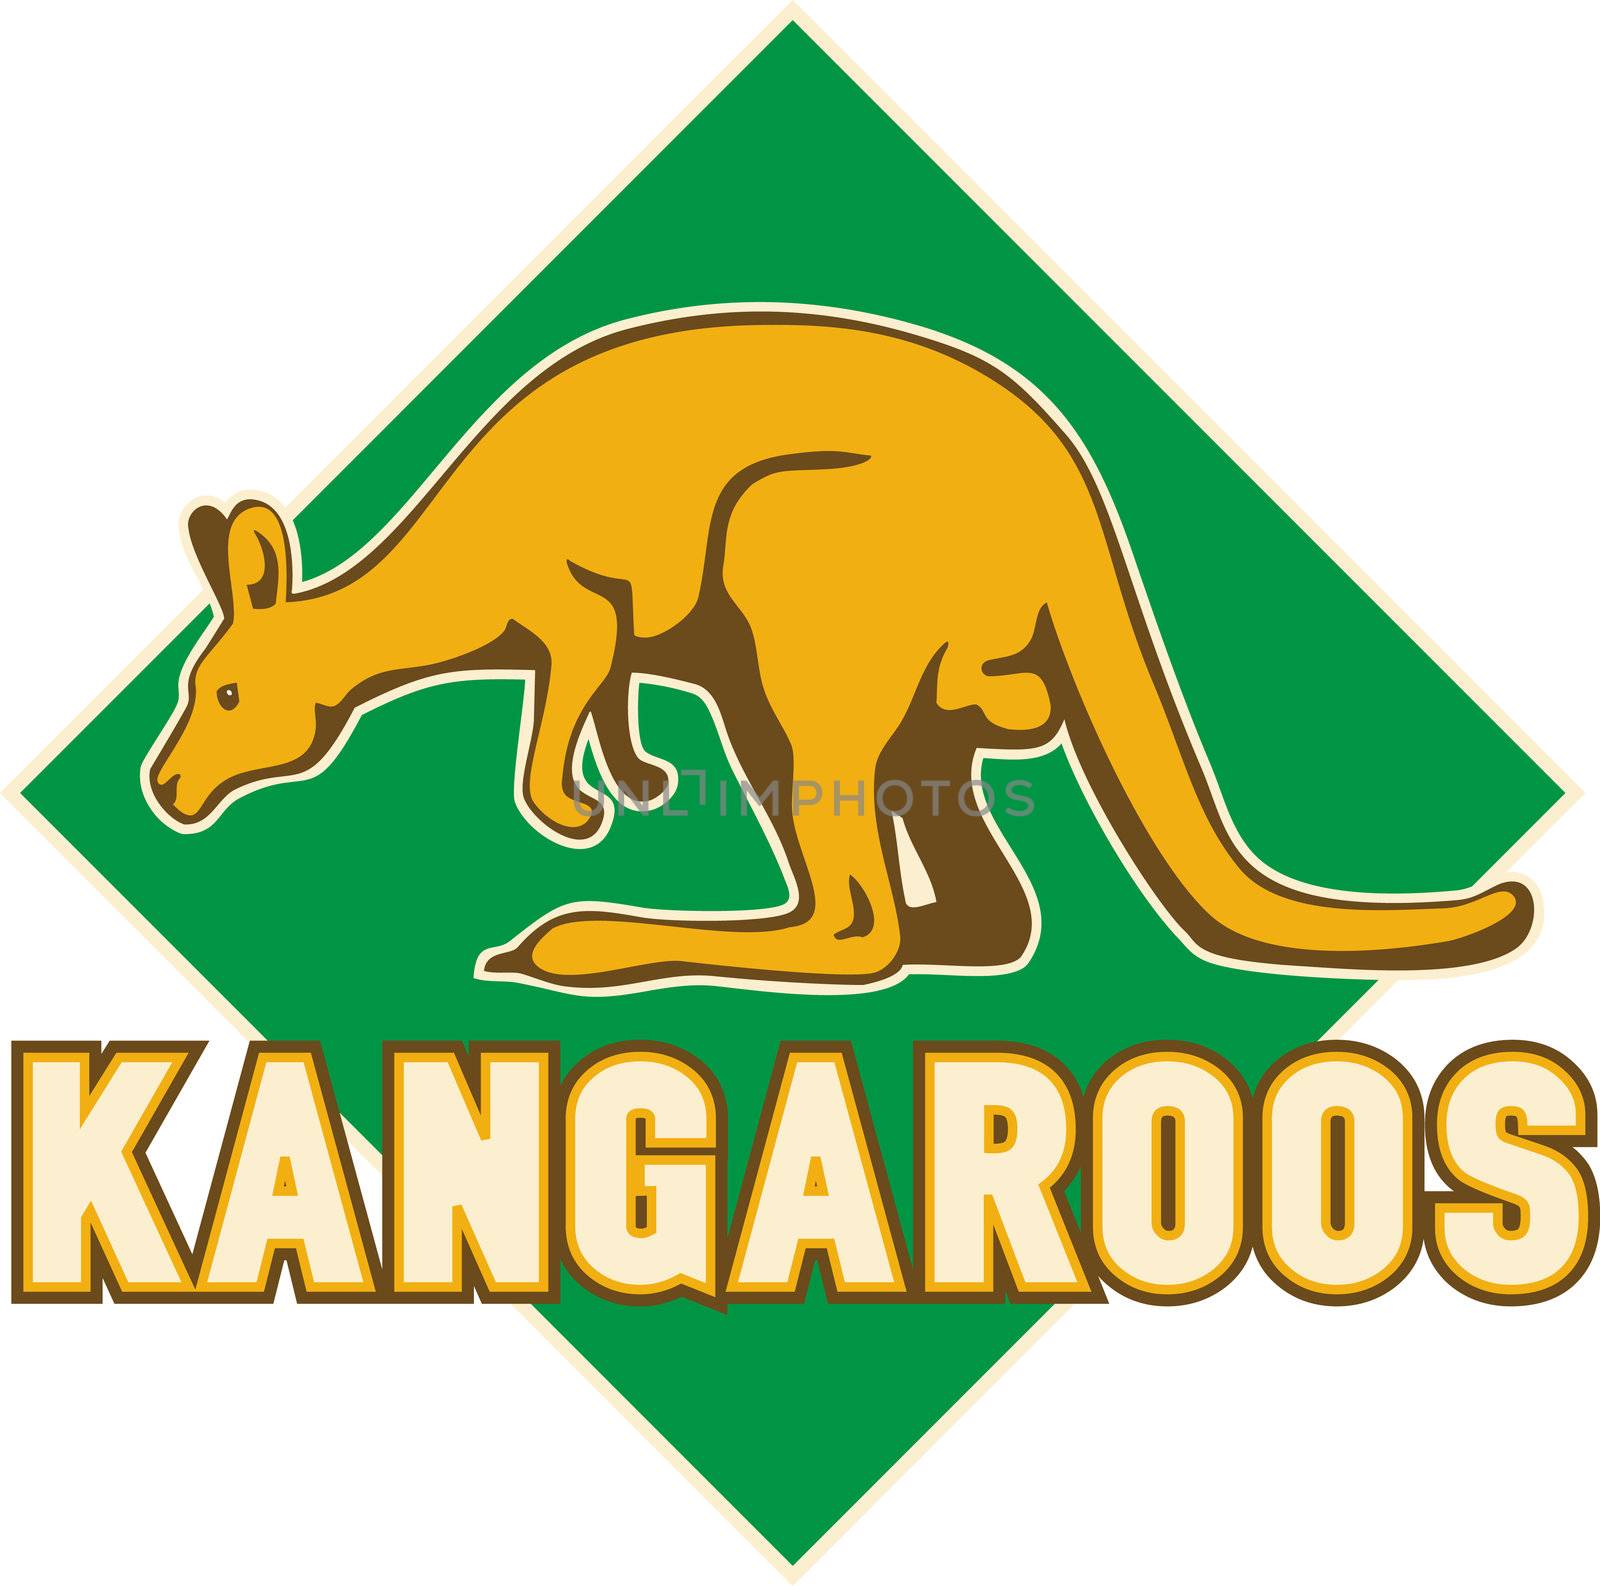 illustration of a kangaroo side view set inside a shield suitable for any sports sporting club team mascot